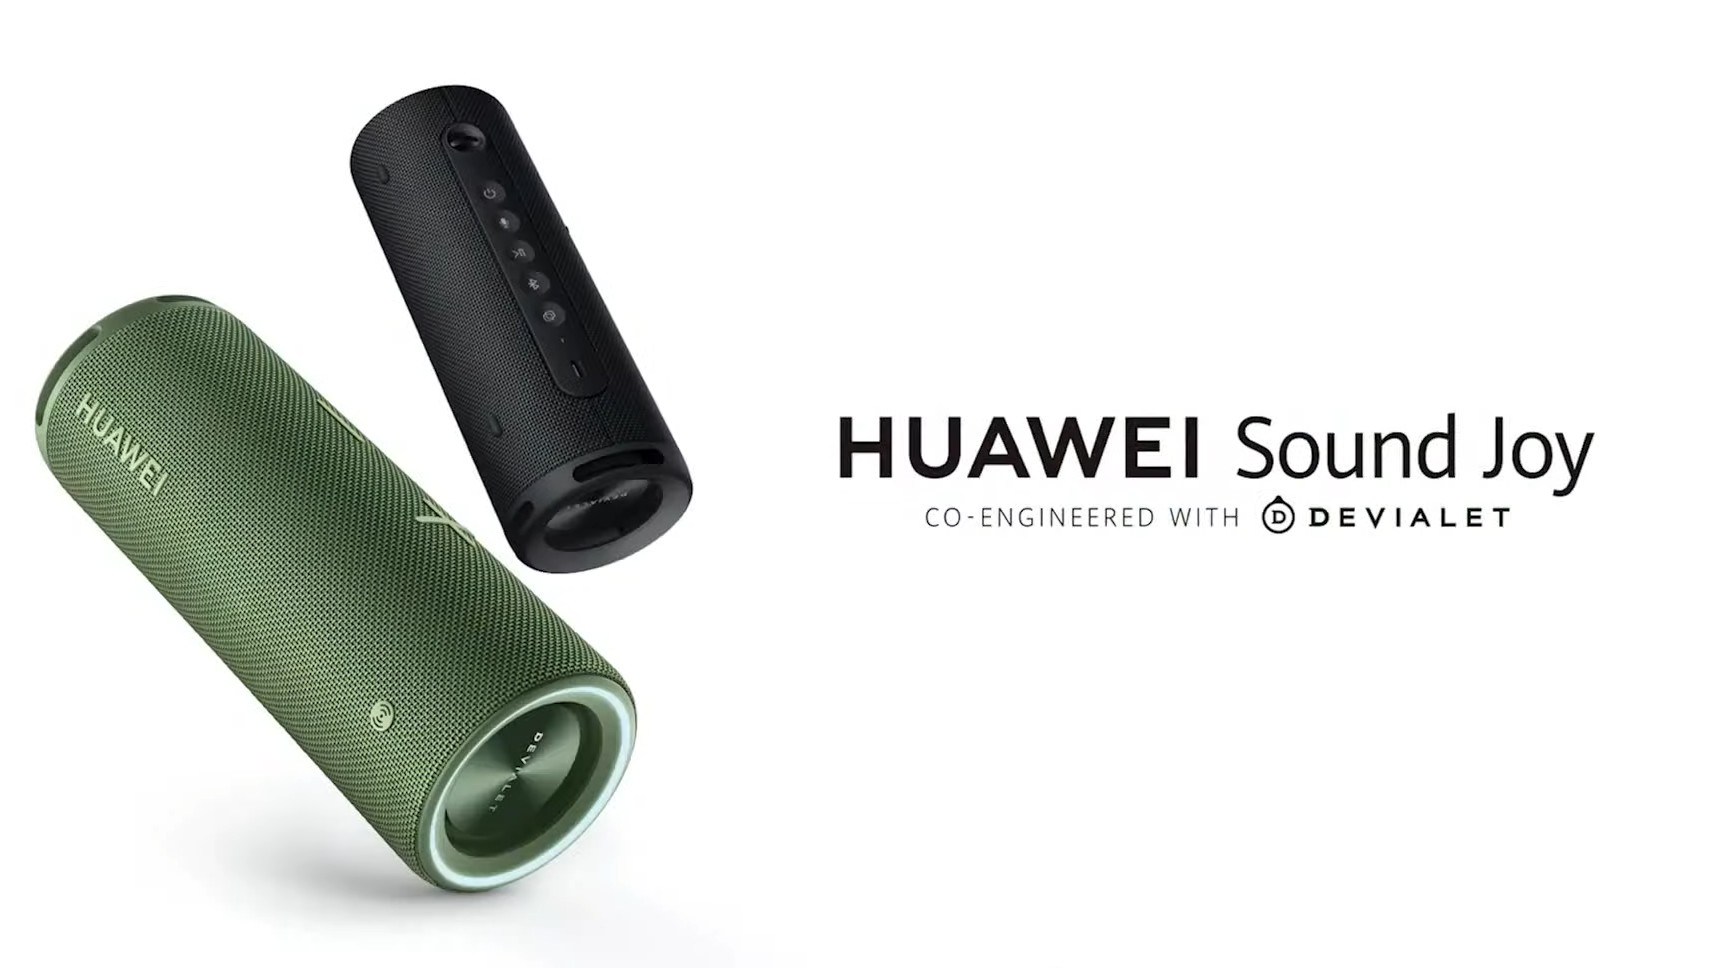 Huawei staunch unveiled its first portable Bluetooth speaker to rival the Sonos Hurry